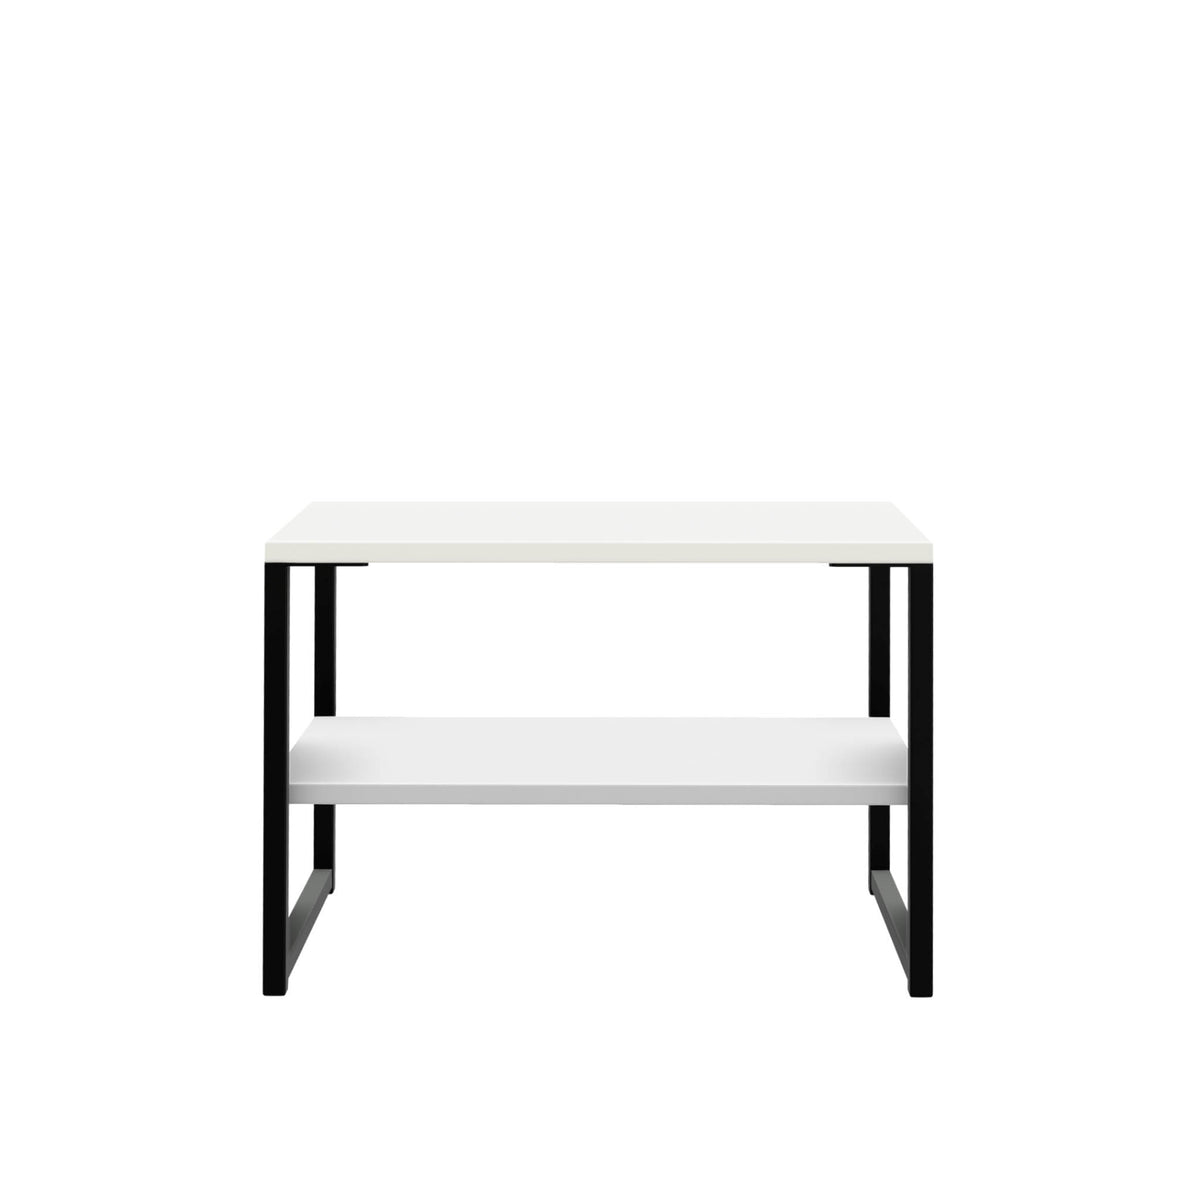 Hudson White Sofa Side Lamp Table with Shelf and black legs